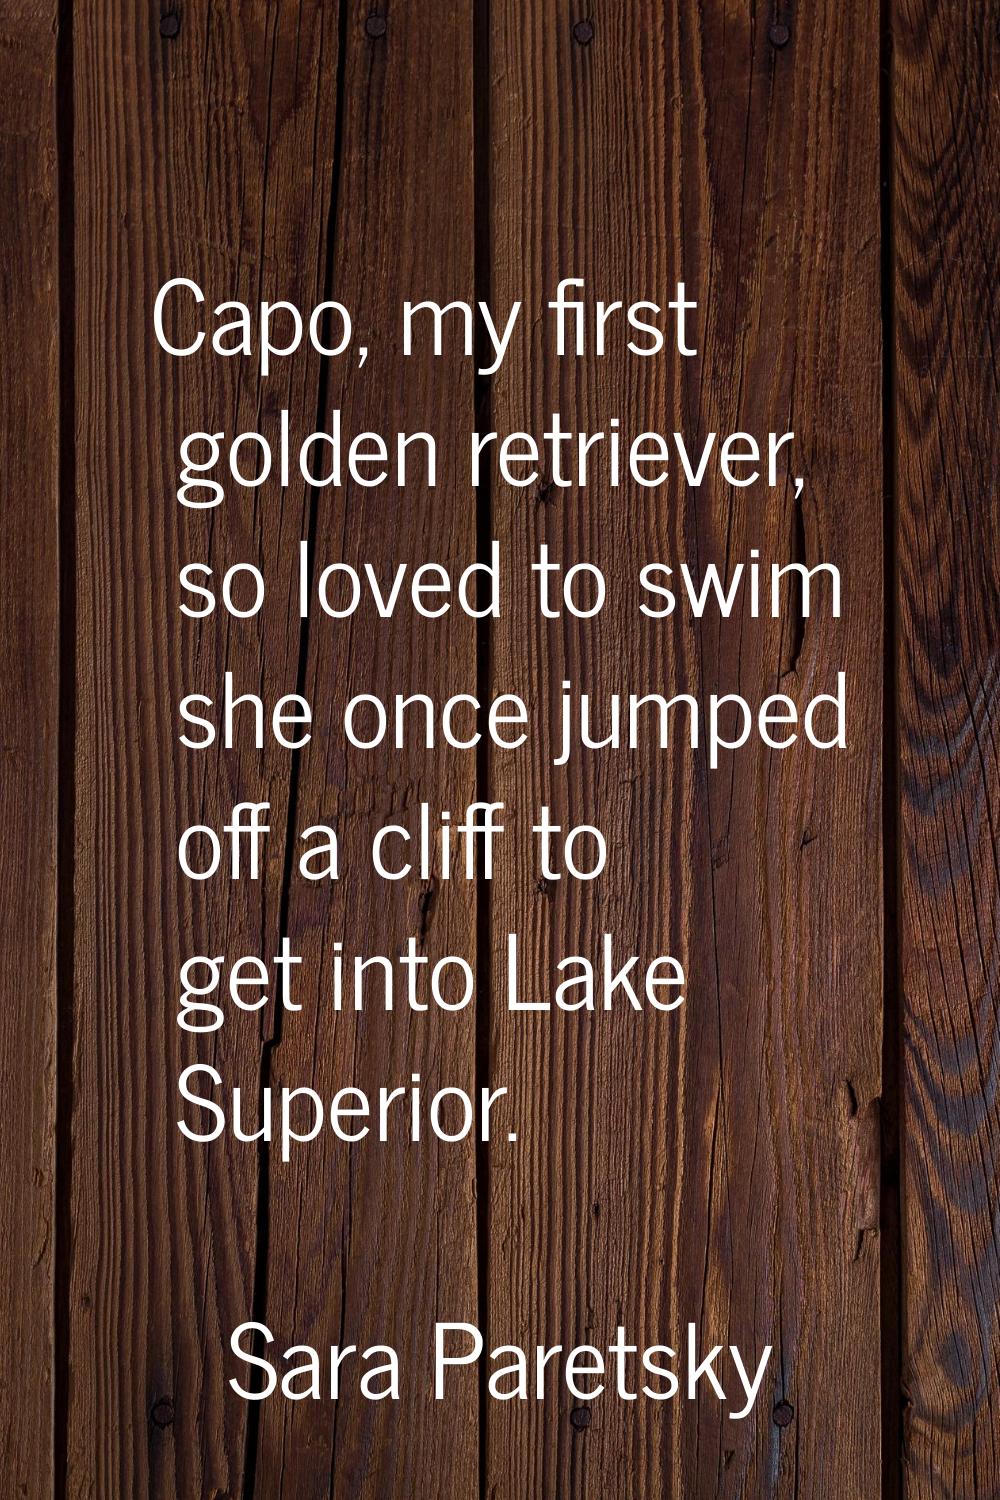 Capo, my first golden retriever, so loved to swim she once jumped off a cliff to get into Lake Supe